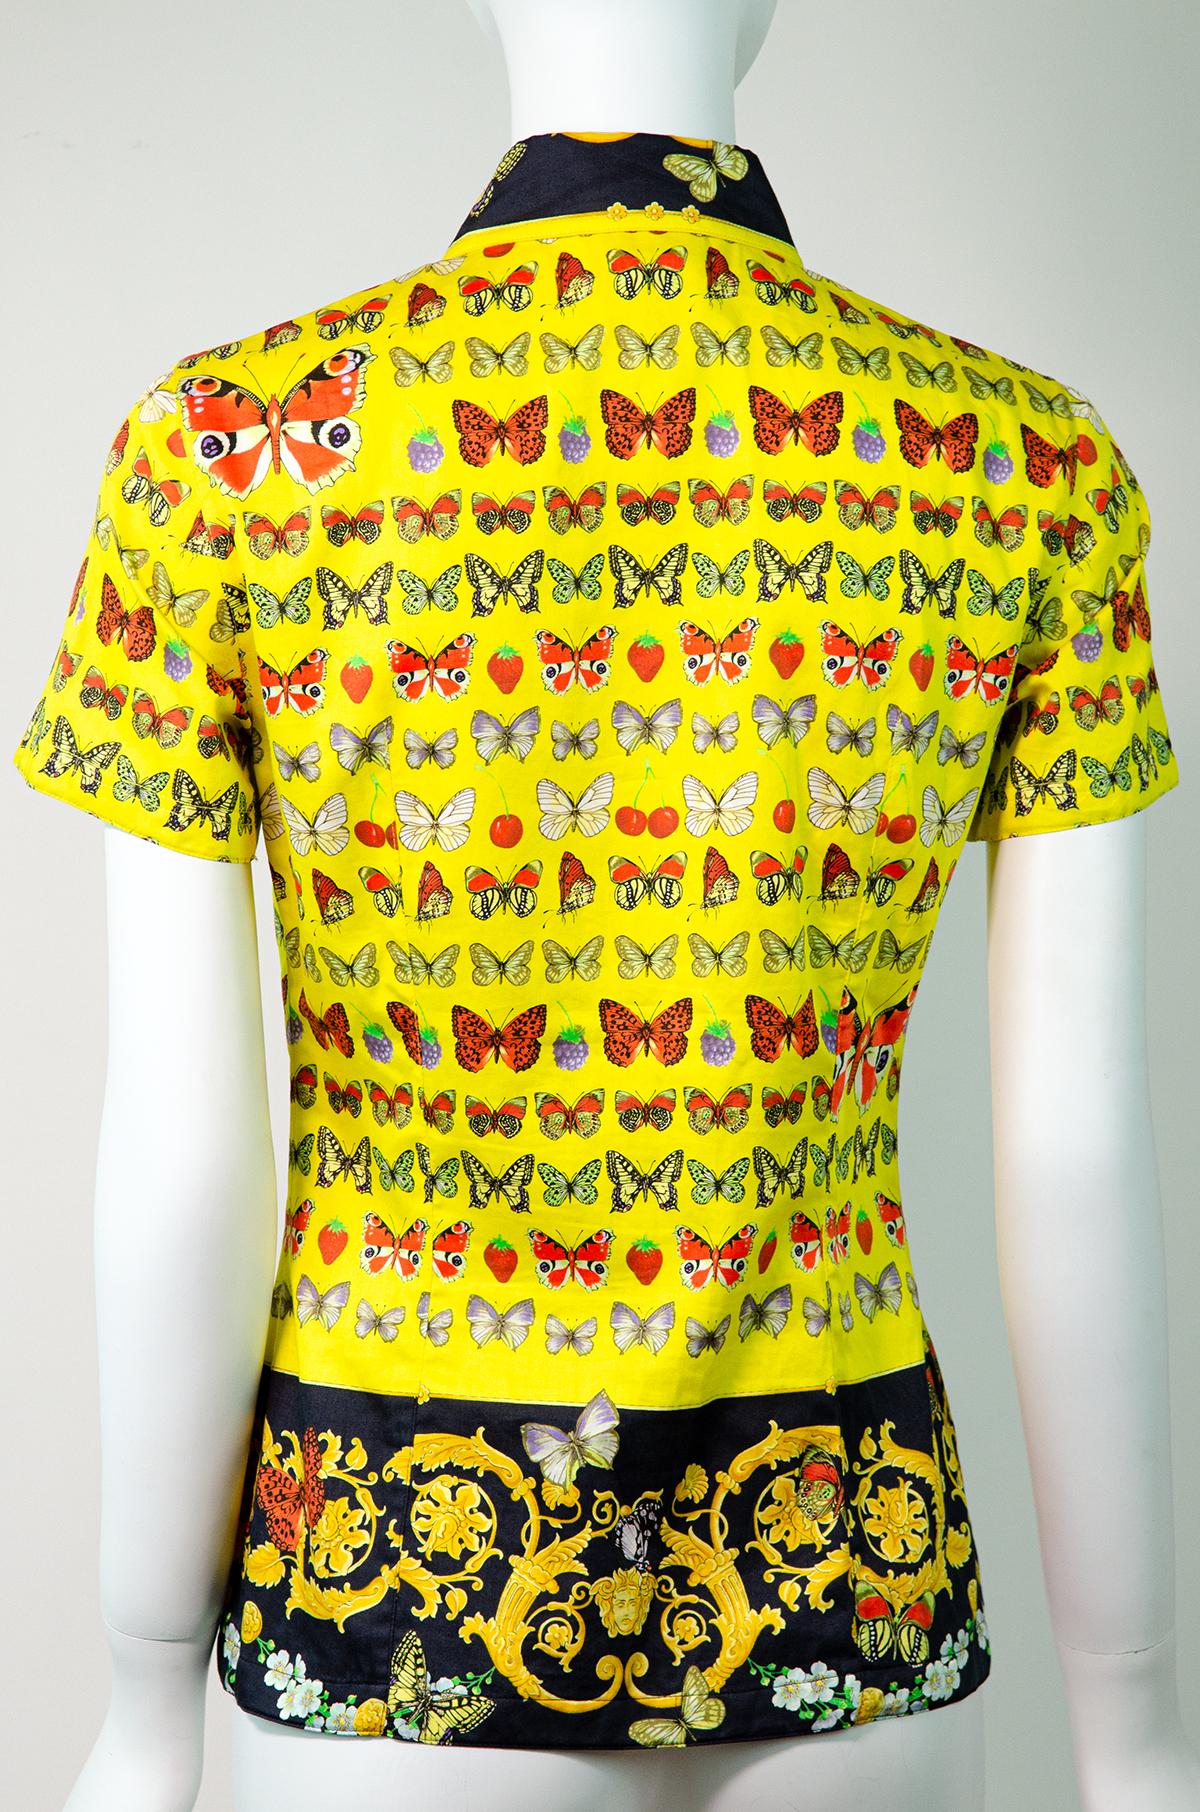 Women's VERSACE S/S 1995 Vintage Iconic Butterfly Print Shirt For Sale